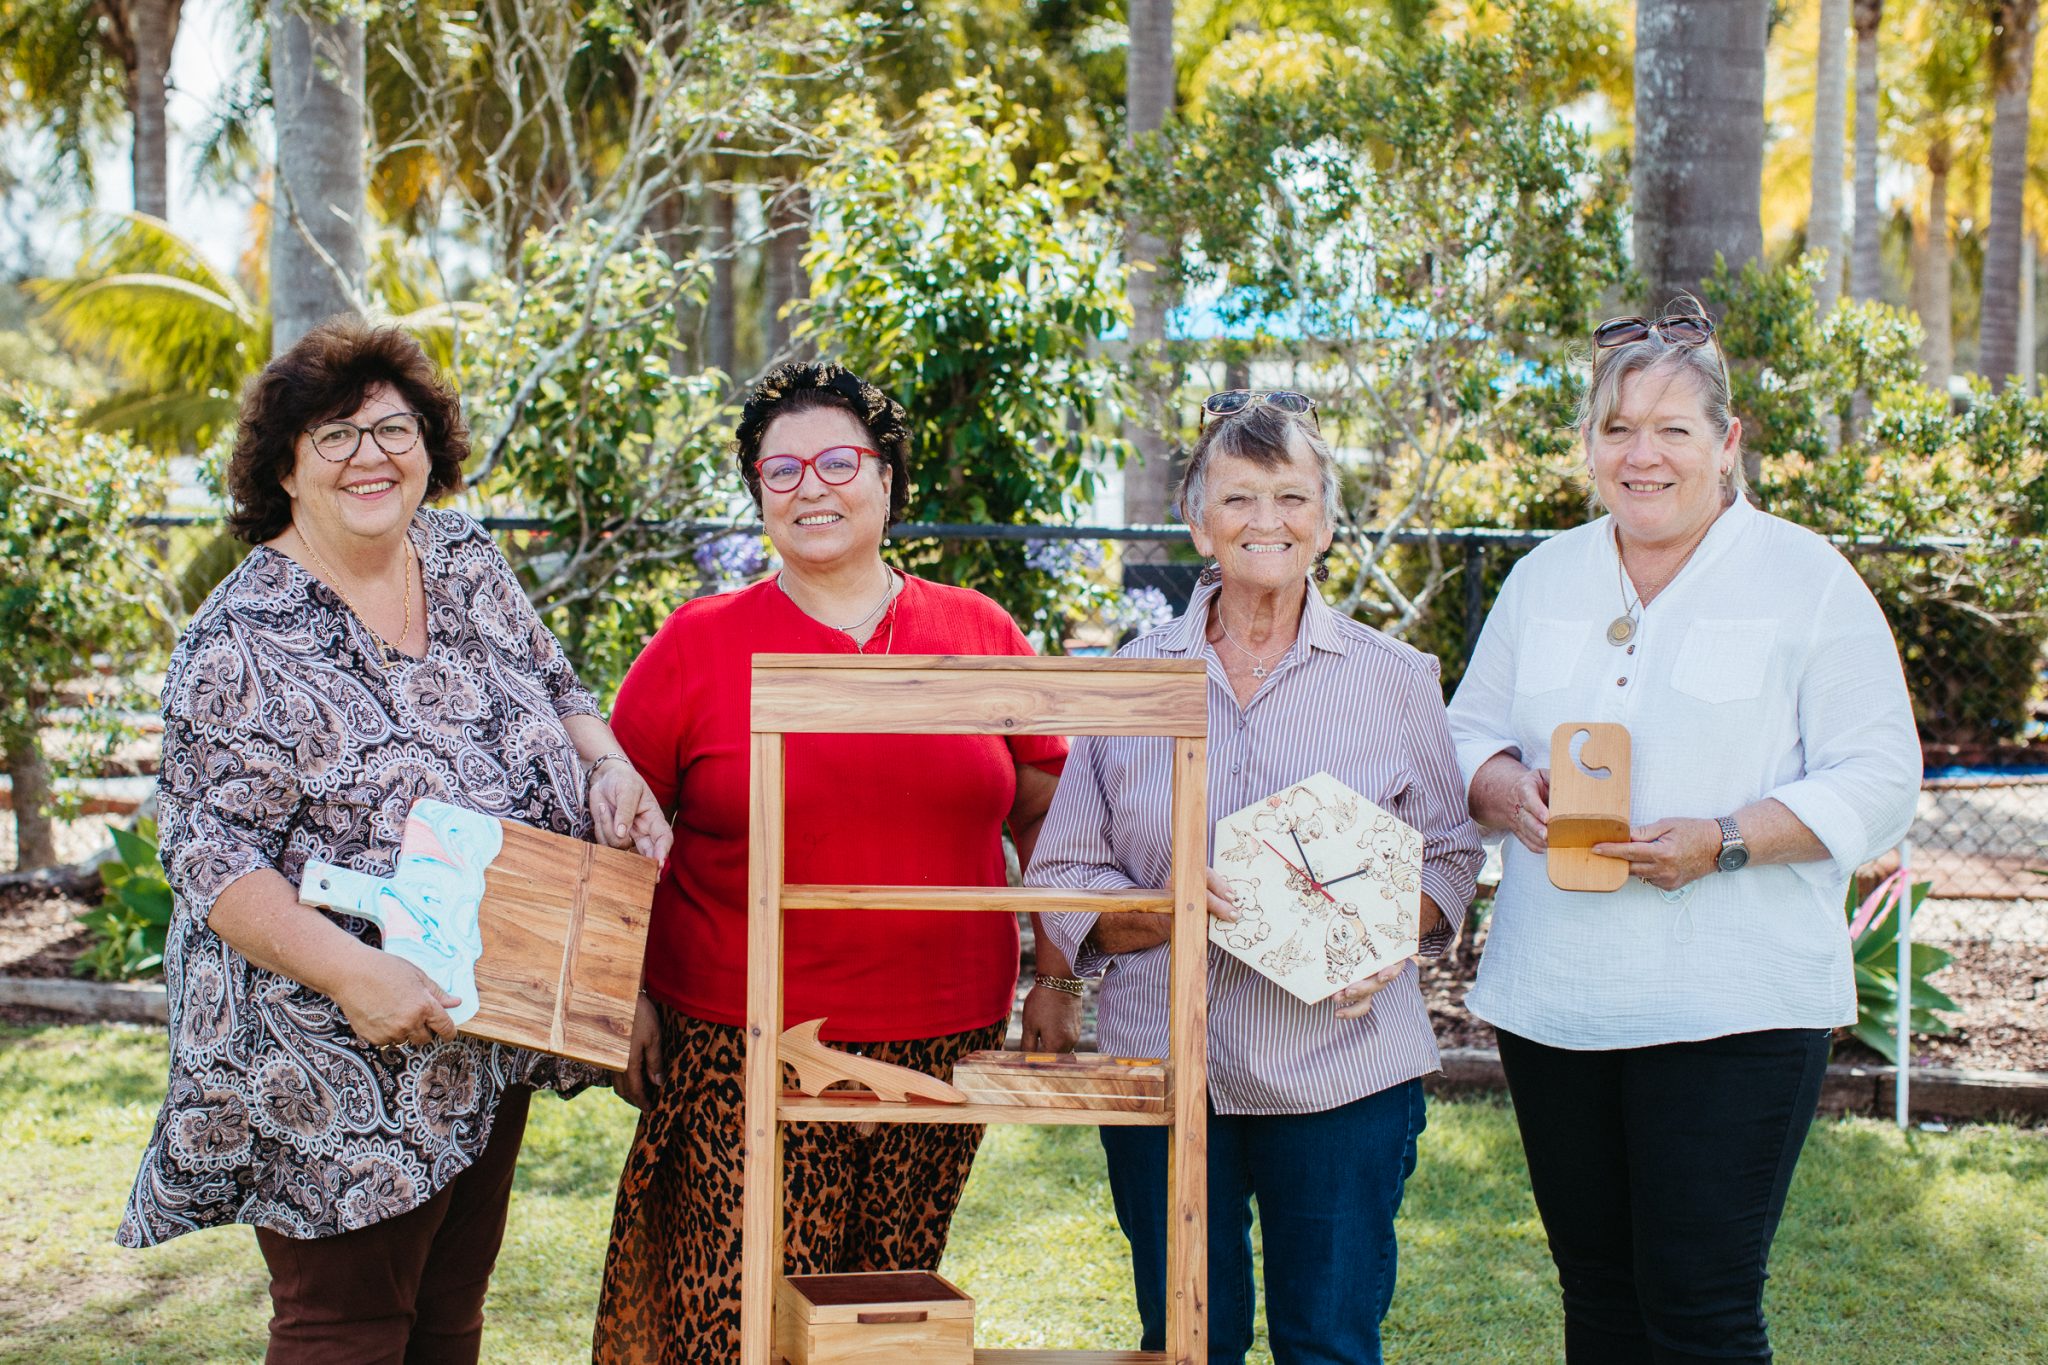 Port Macquarie Women at Work with Wood